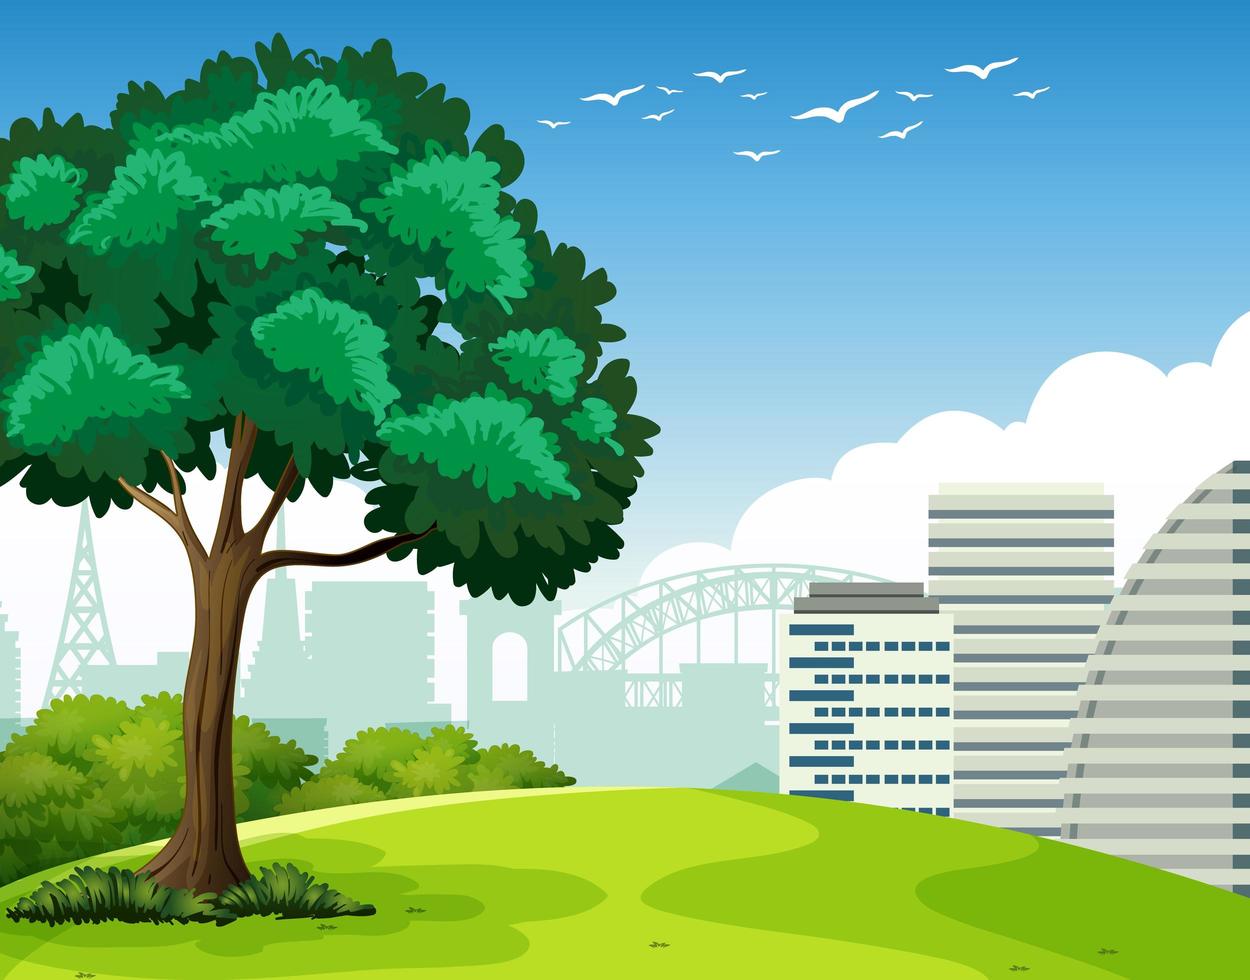 Park outdoor scene with a tree and many building in background vector